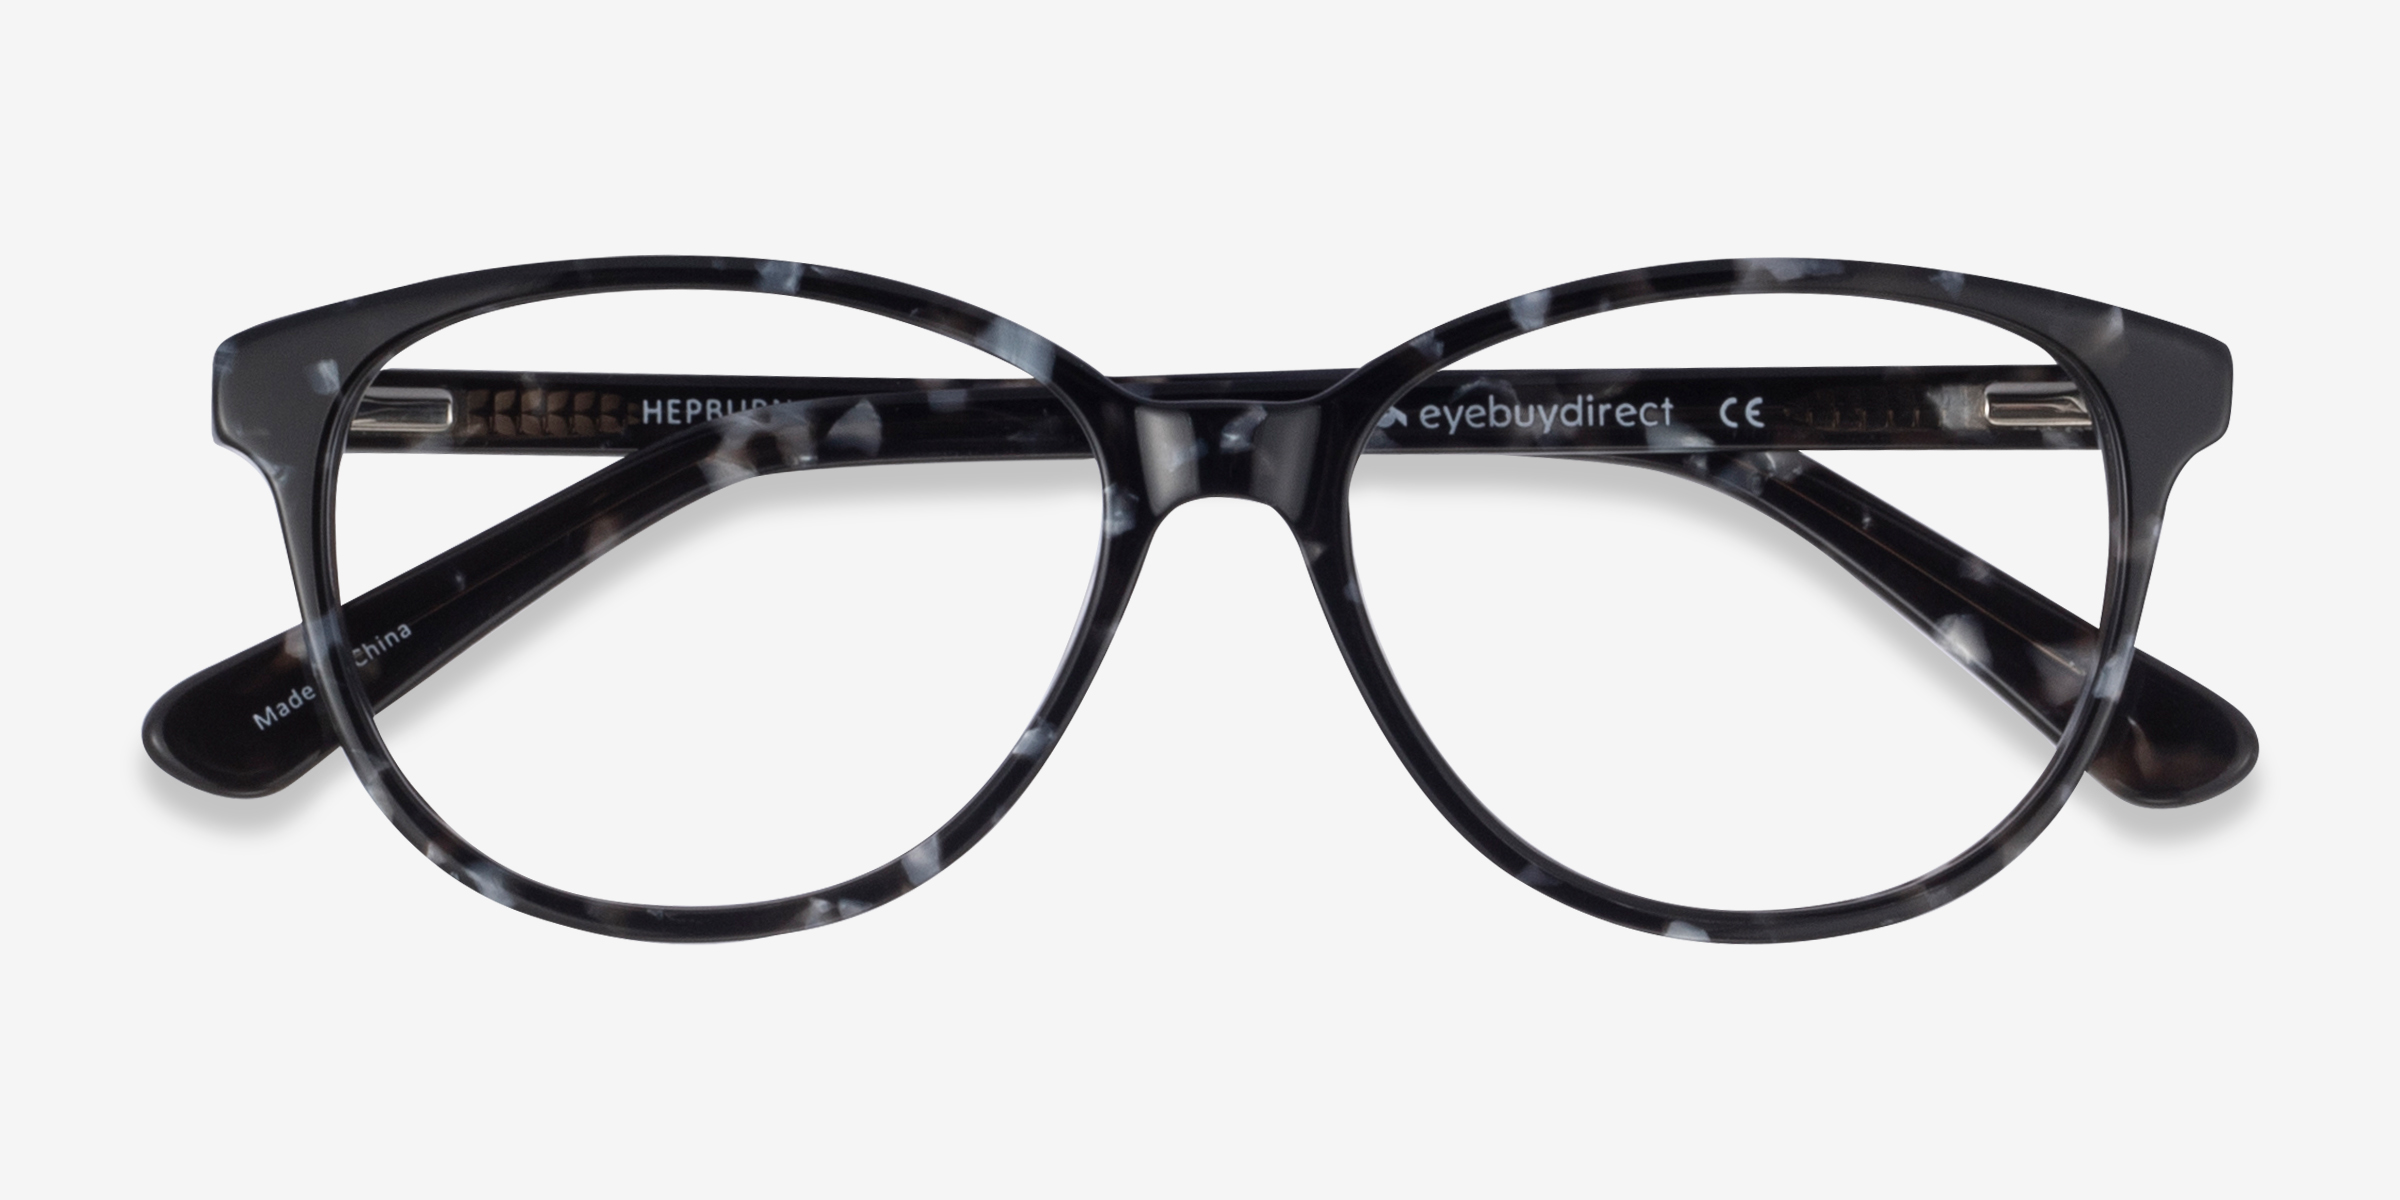 Hepburn Cat Eye Gray And Floral Glasses For Women Eyebuydirect Canada 